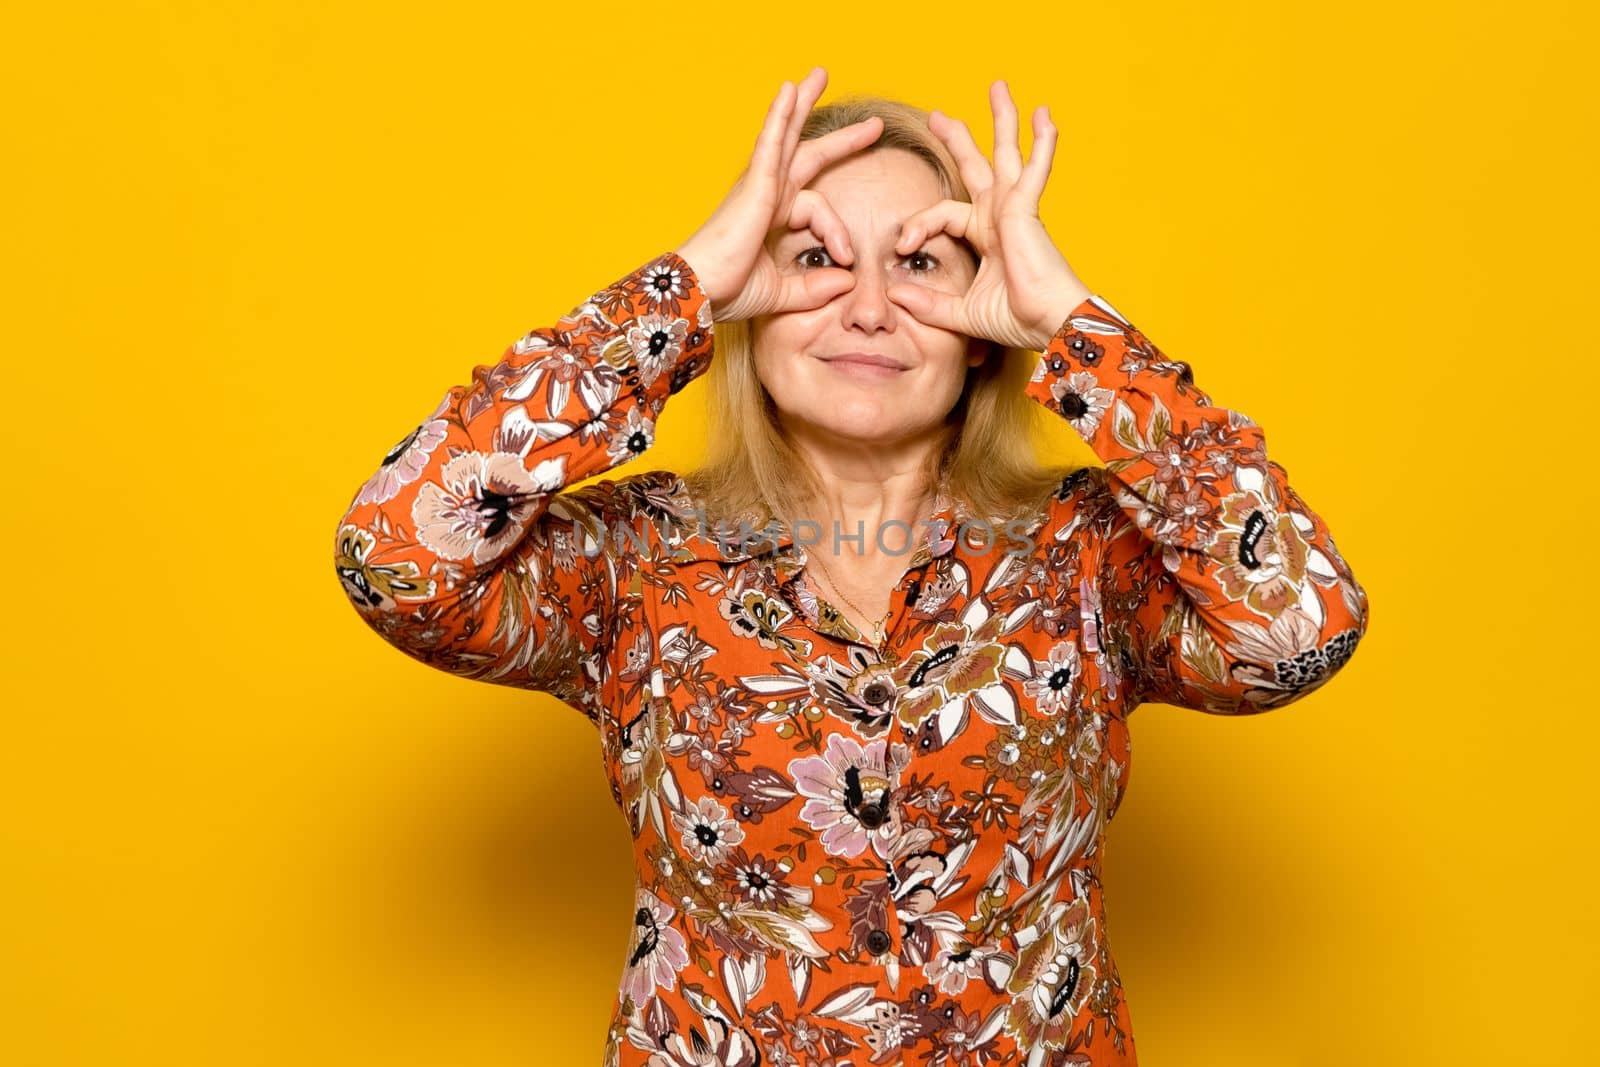 Portrait of astonished caucasian blonde woman spying, seeing amazing shocking event, looking through fingers imitating binoculars, wearing patterned dress. Isolated on yellow background.